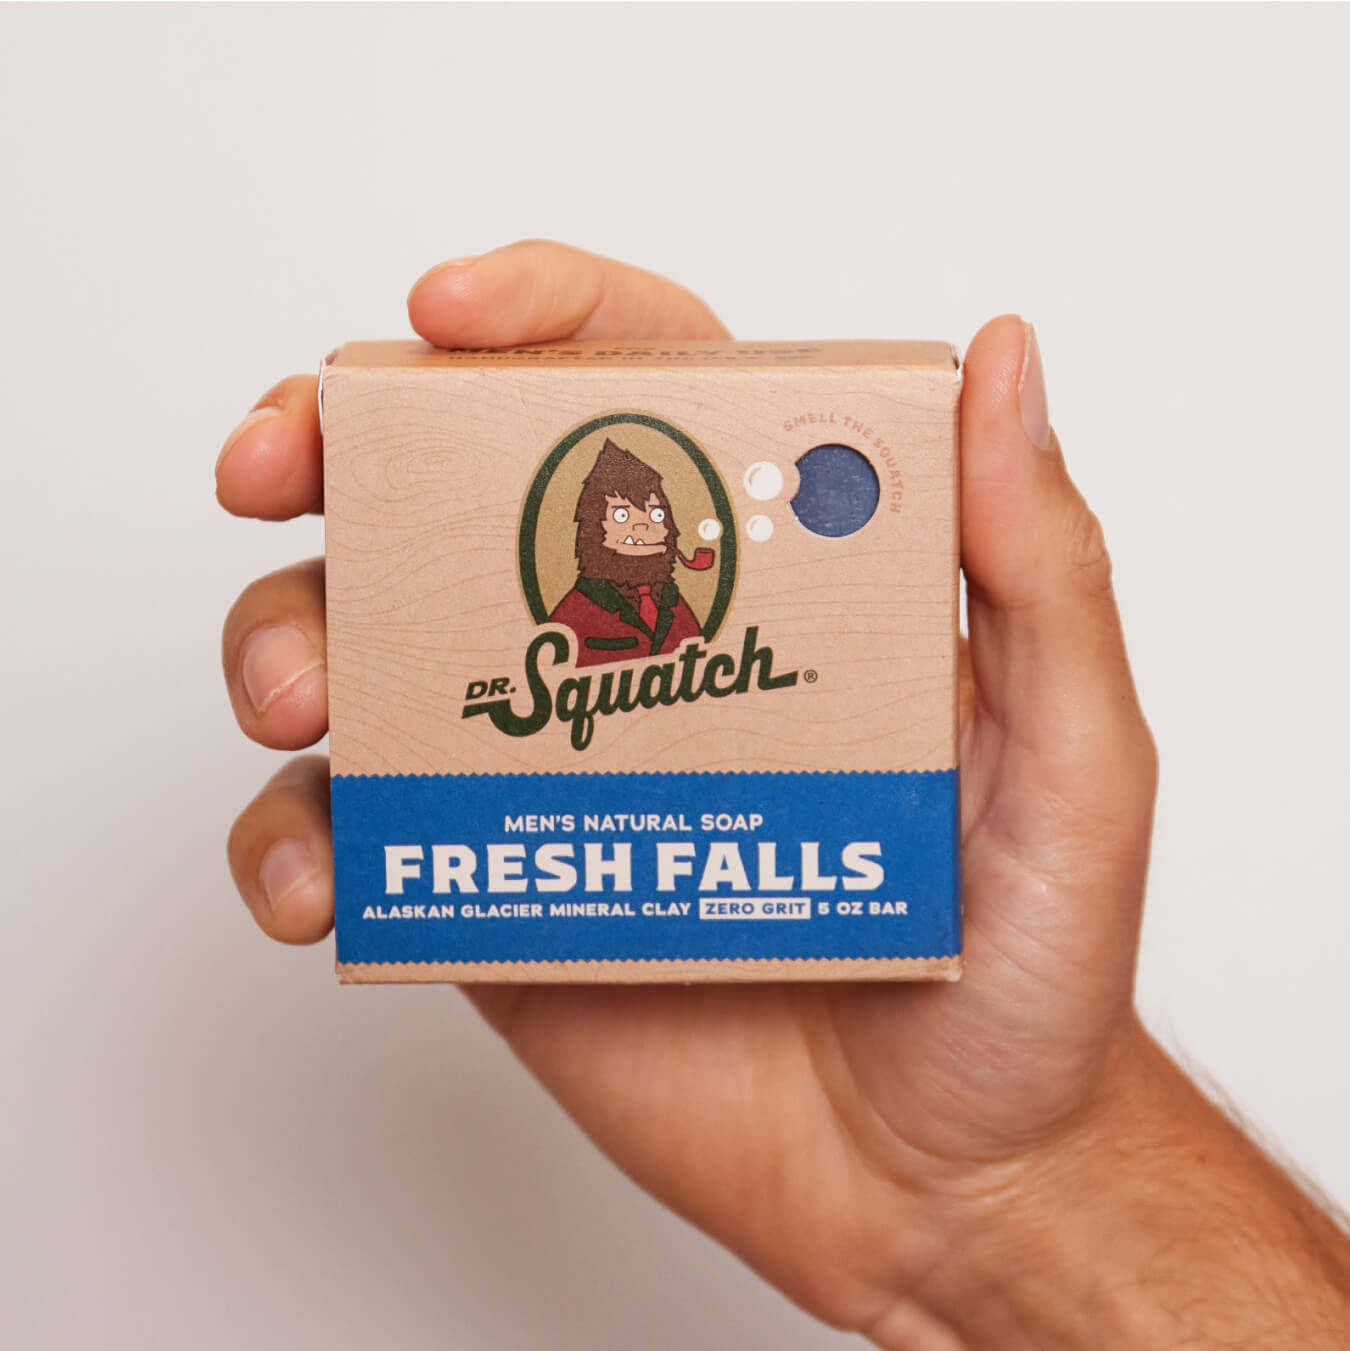 NEW Dr. Squatch LIMITED EDITION - CRYPTO CLEANSE Soap Bar With